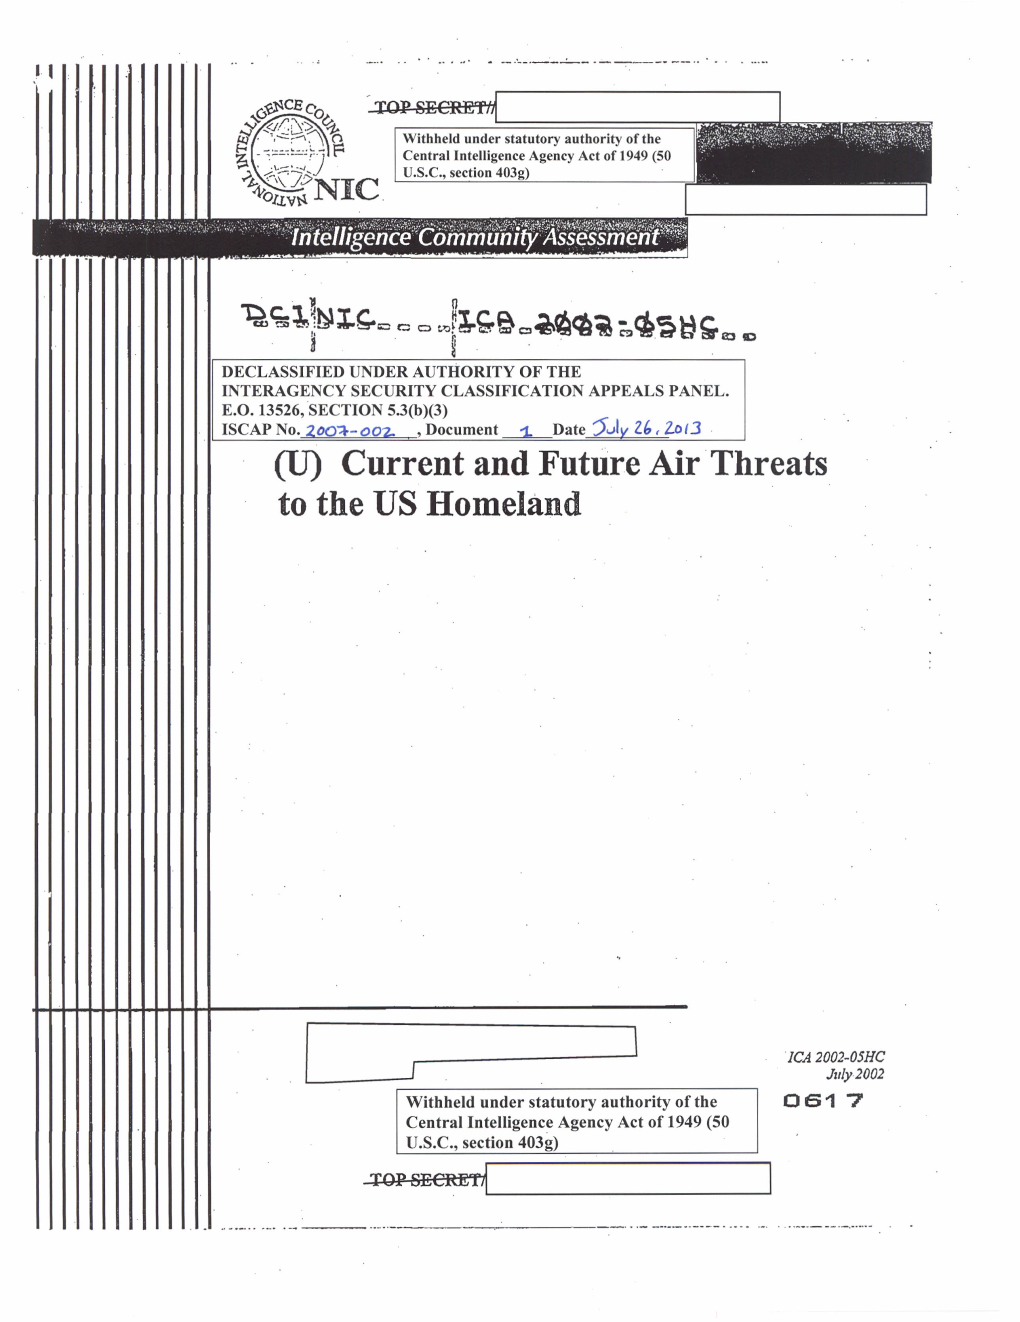 Current and Future Air Threats to the U.S. Homeland